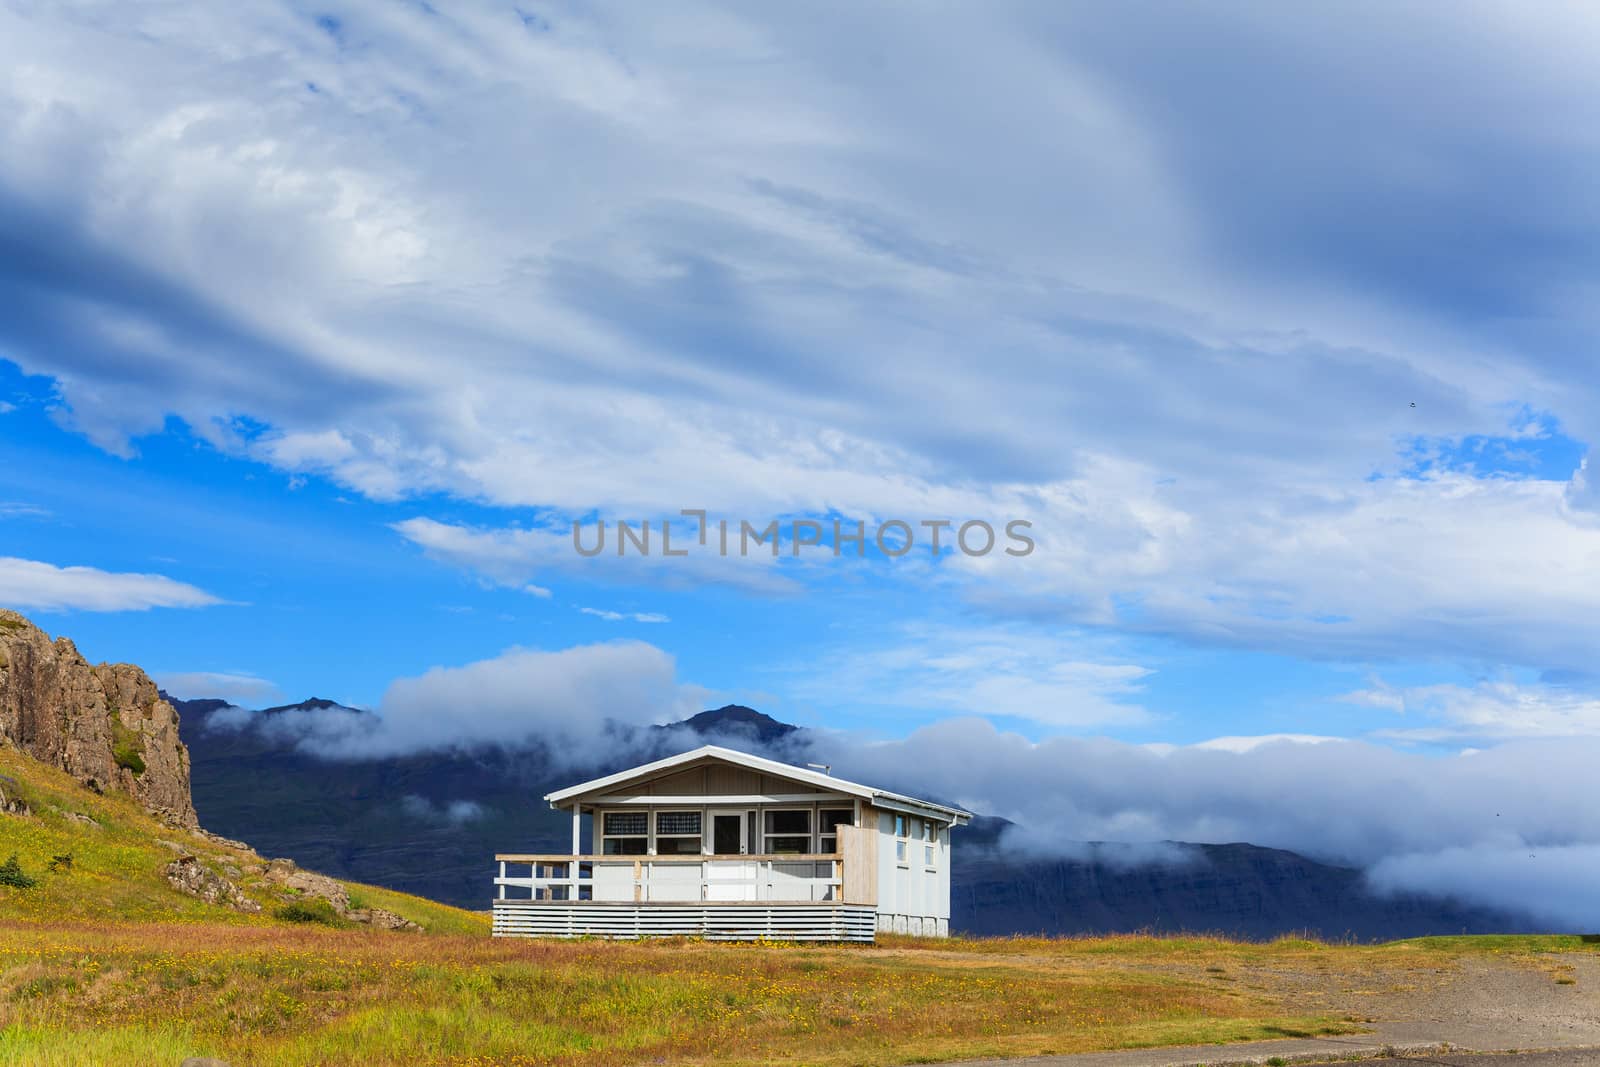 Typical white wooden house against cloudy sky in East Iceland.